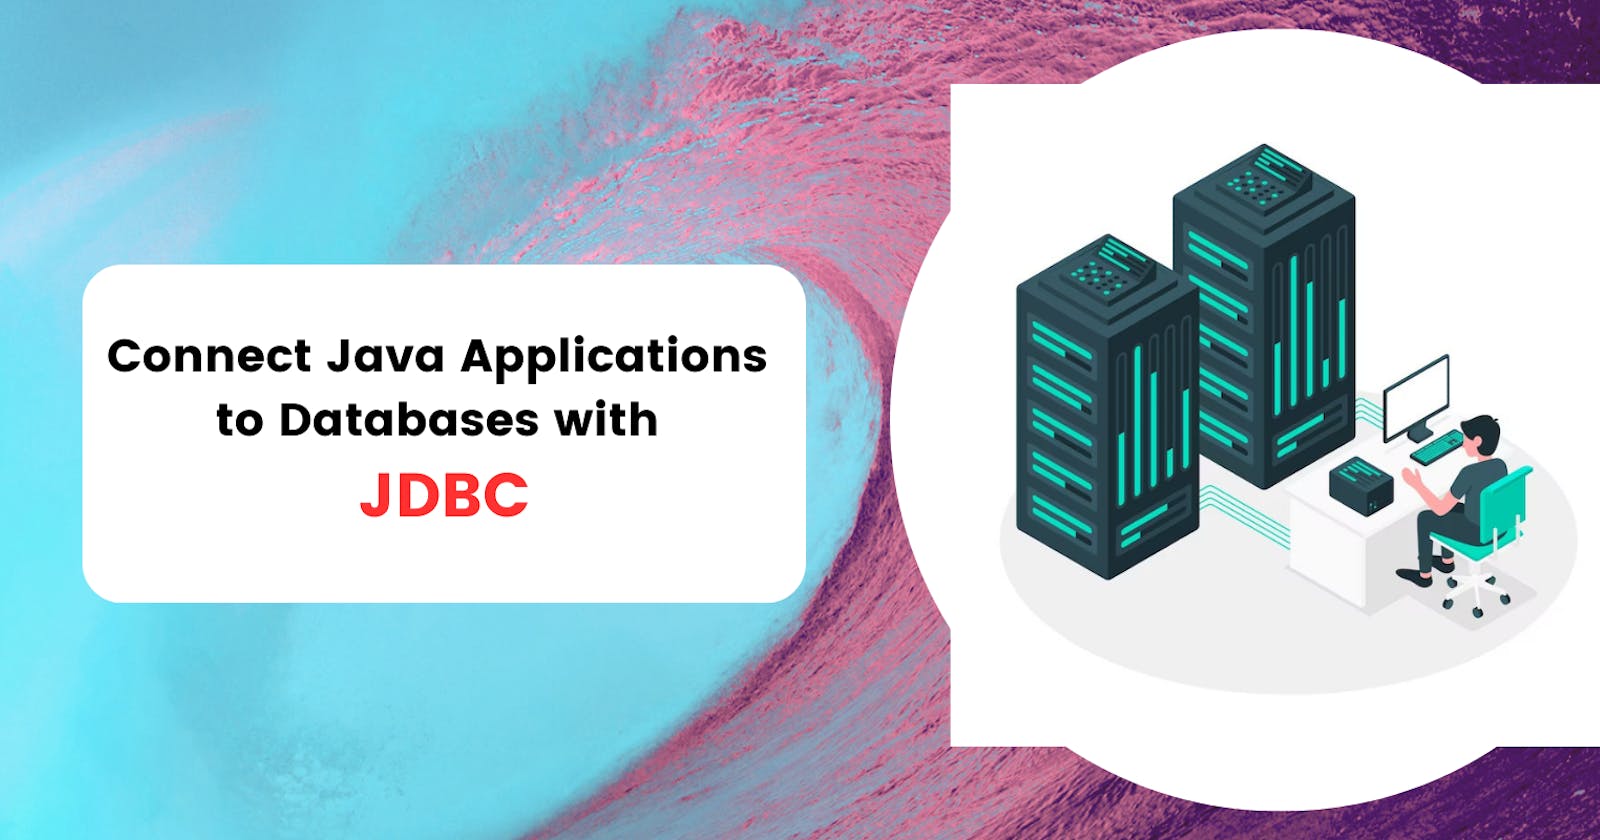 How to Connect Java Applications to Databases with JDBC